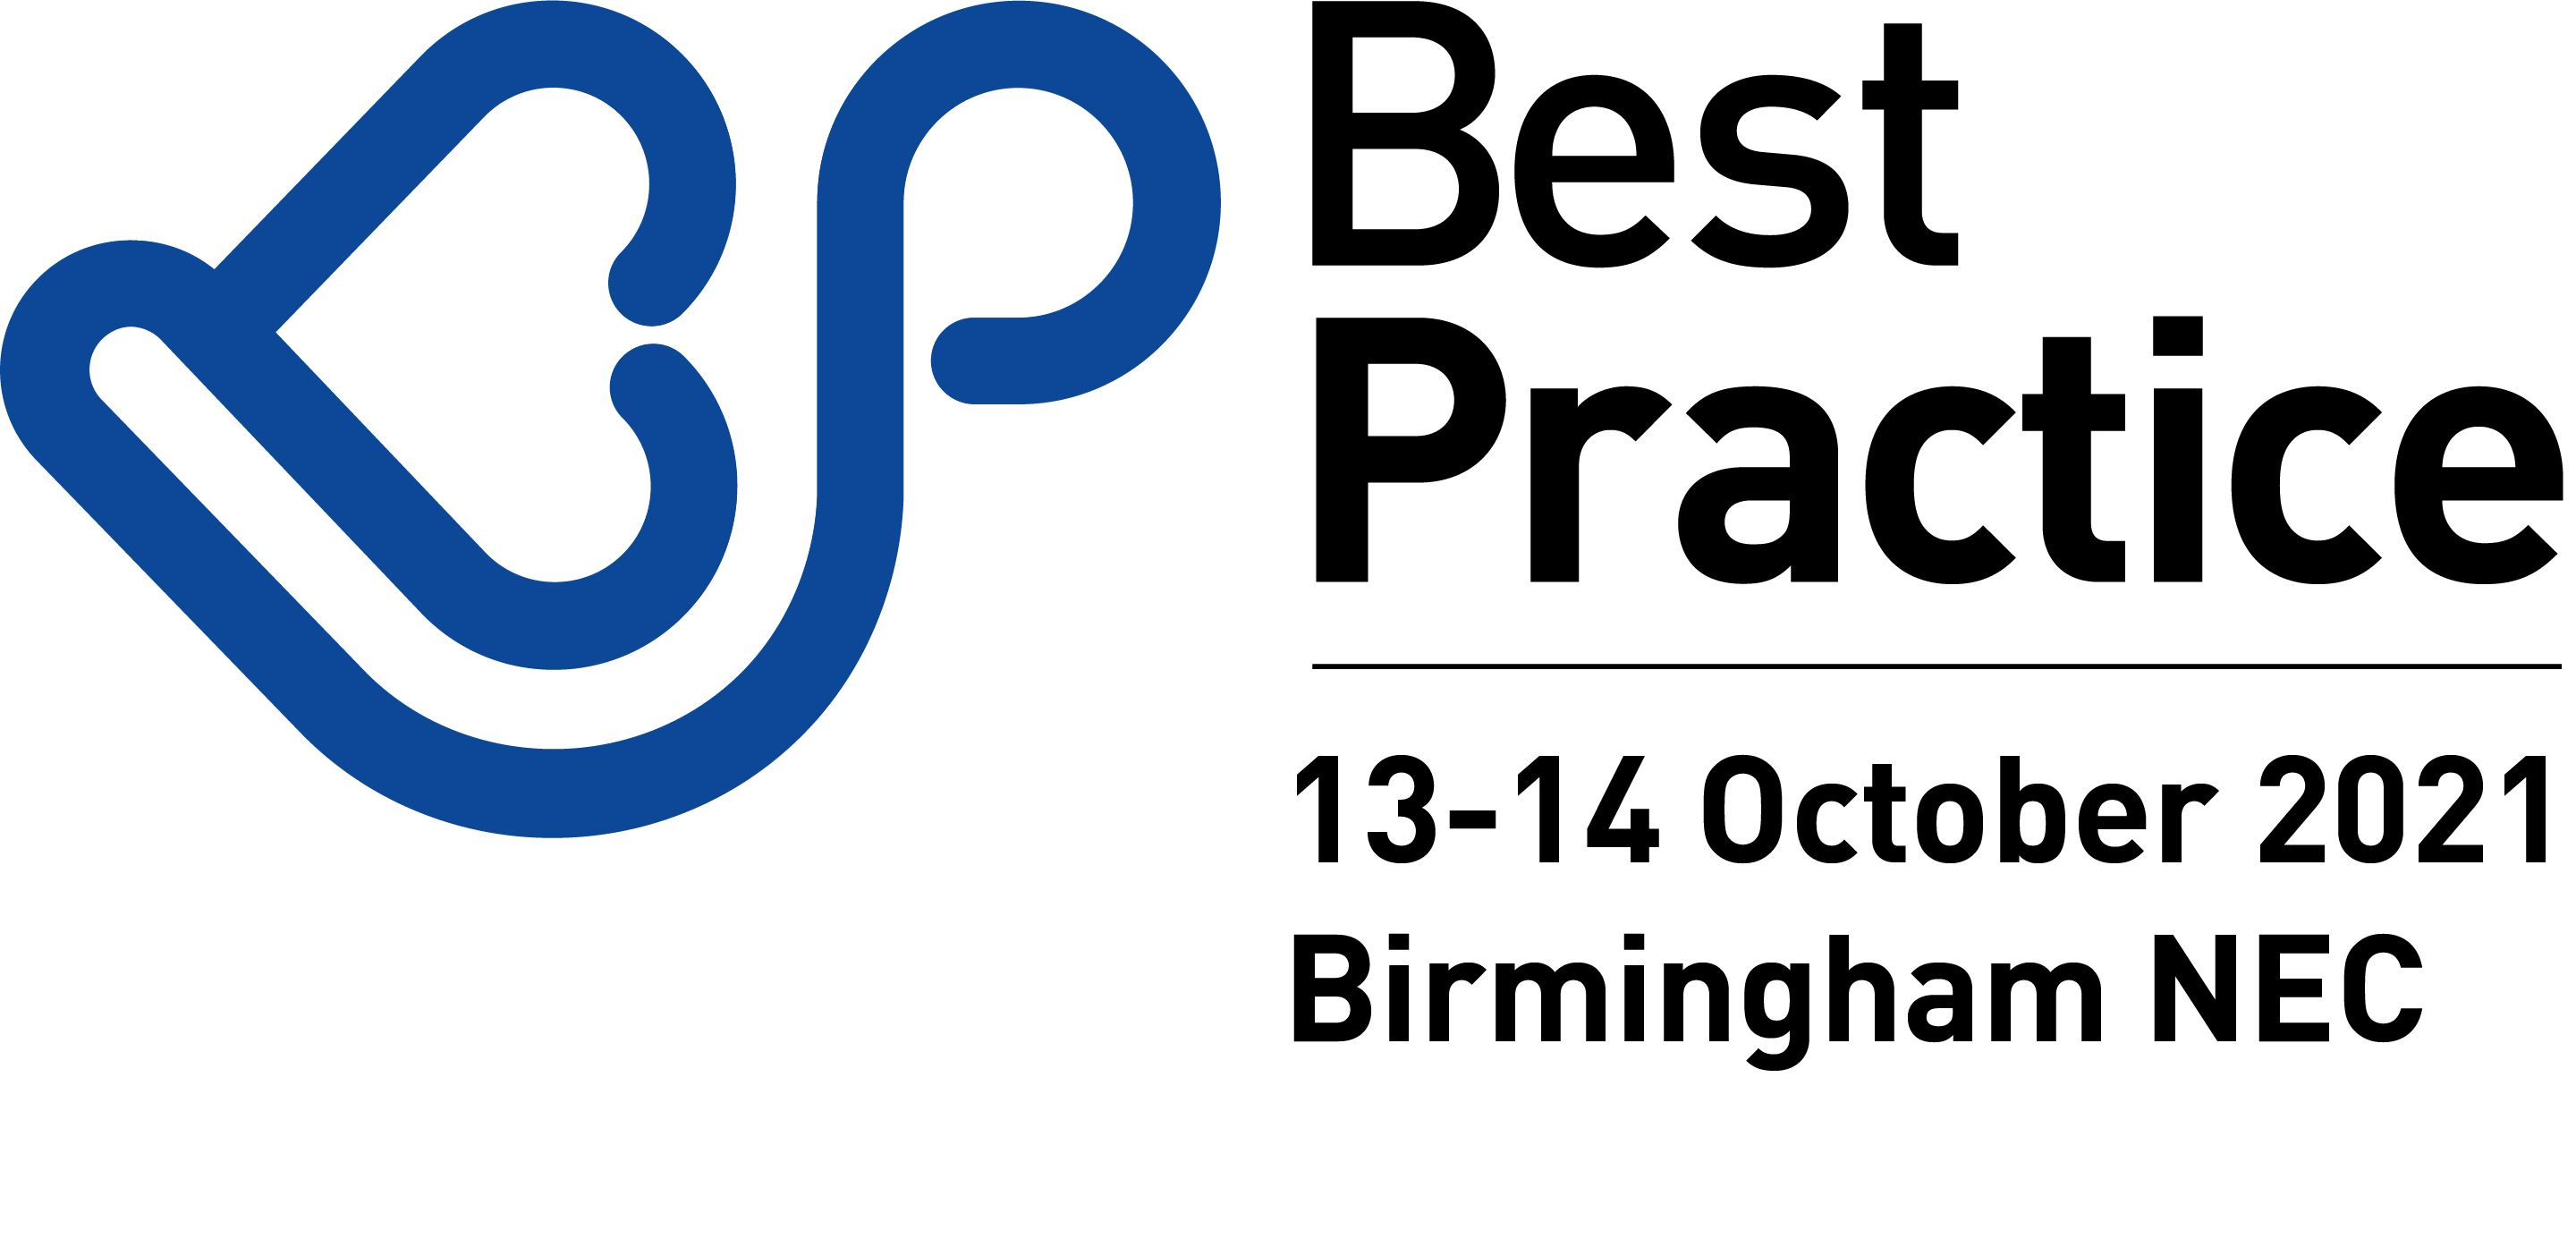 Best Practice, The UK’s leading General Practice Show Announces its Return to The NEC Birmingham This October